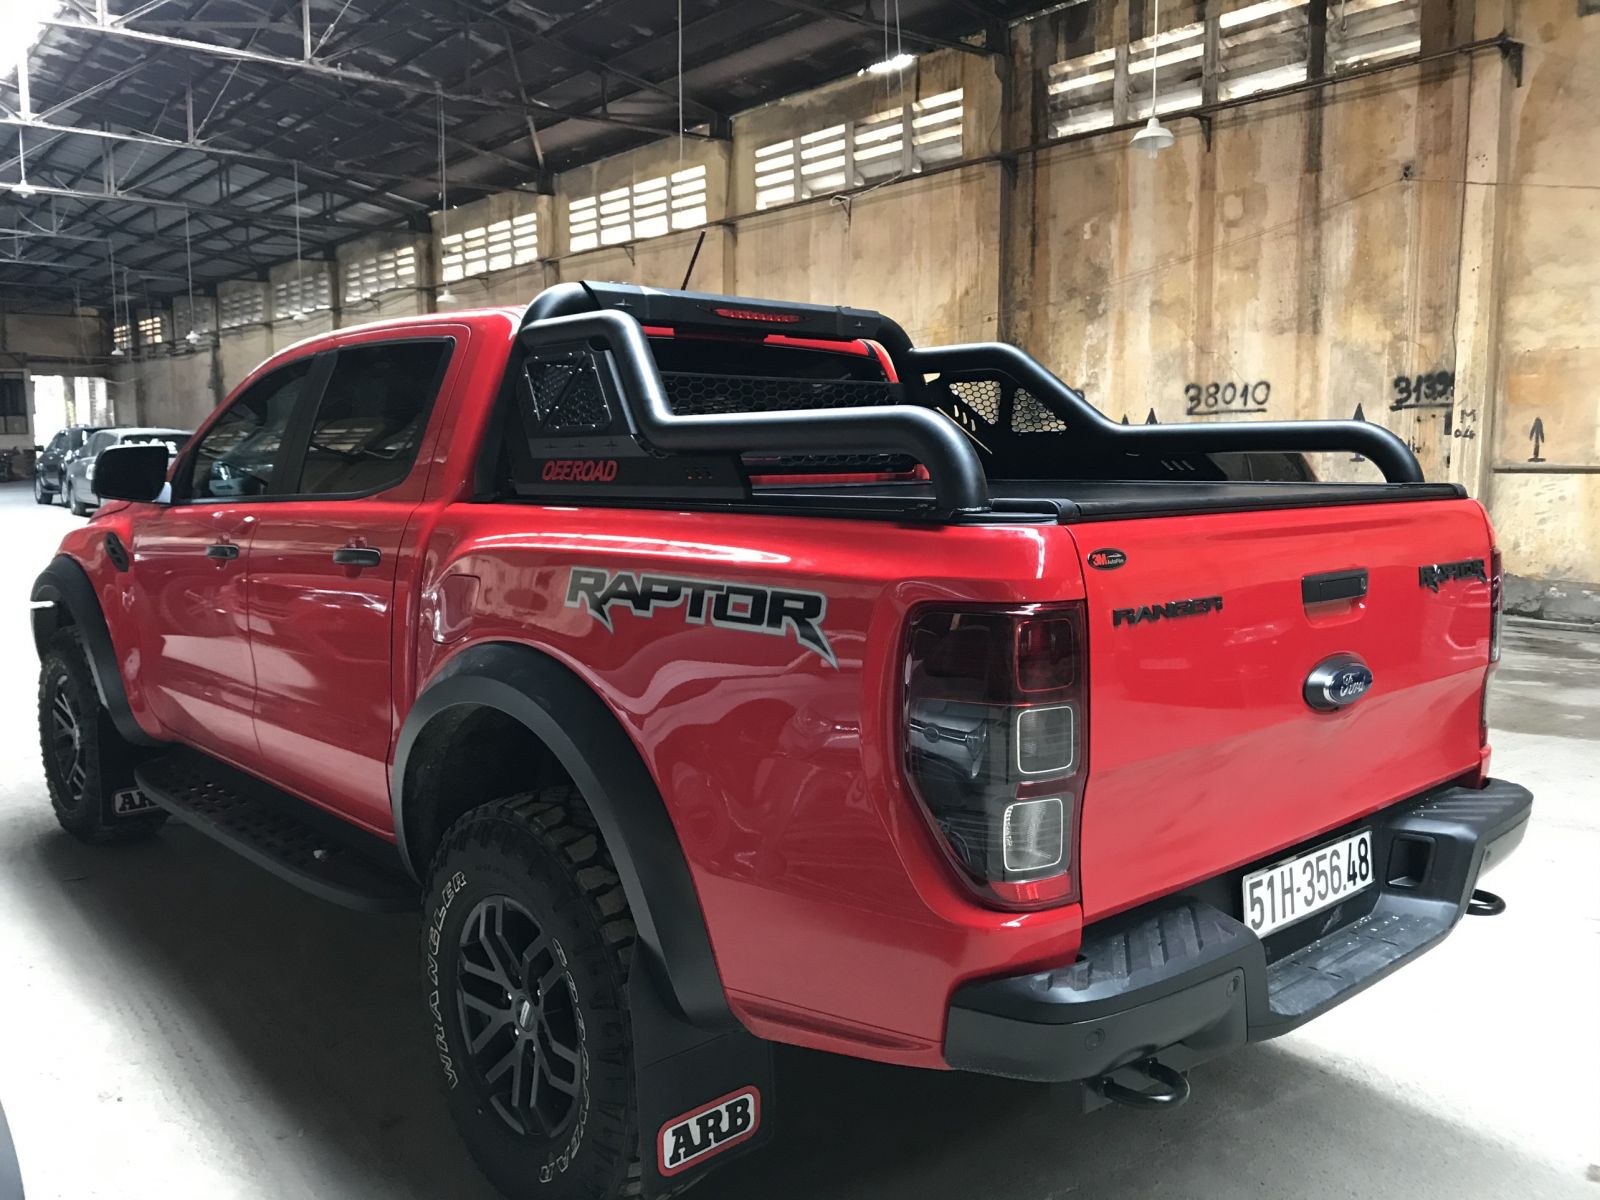 Thanh thể thao Offroad Ranger Raptor